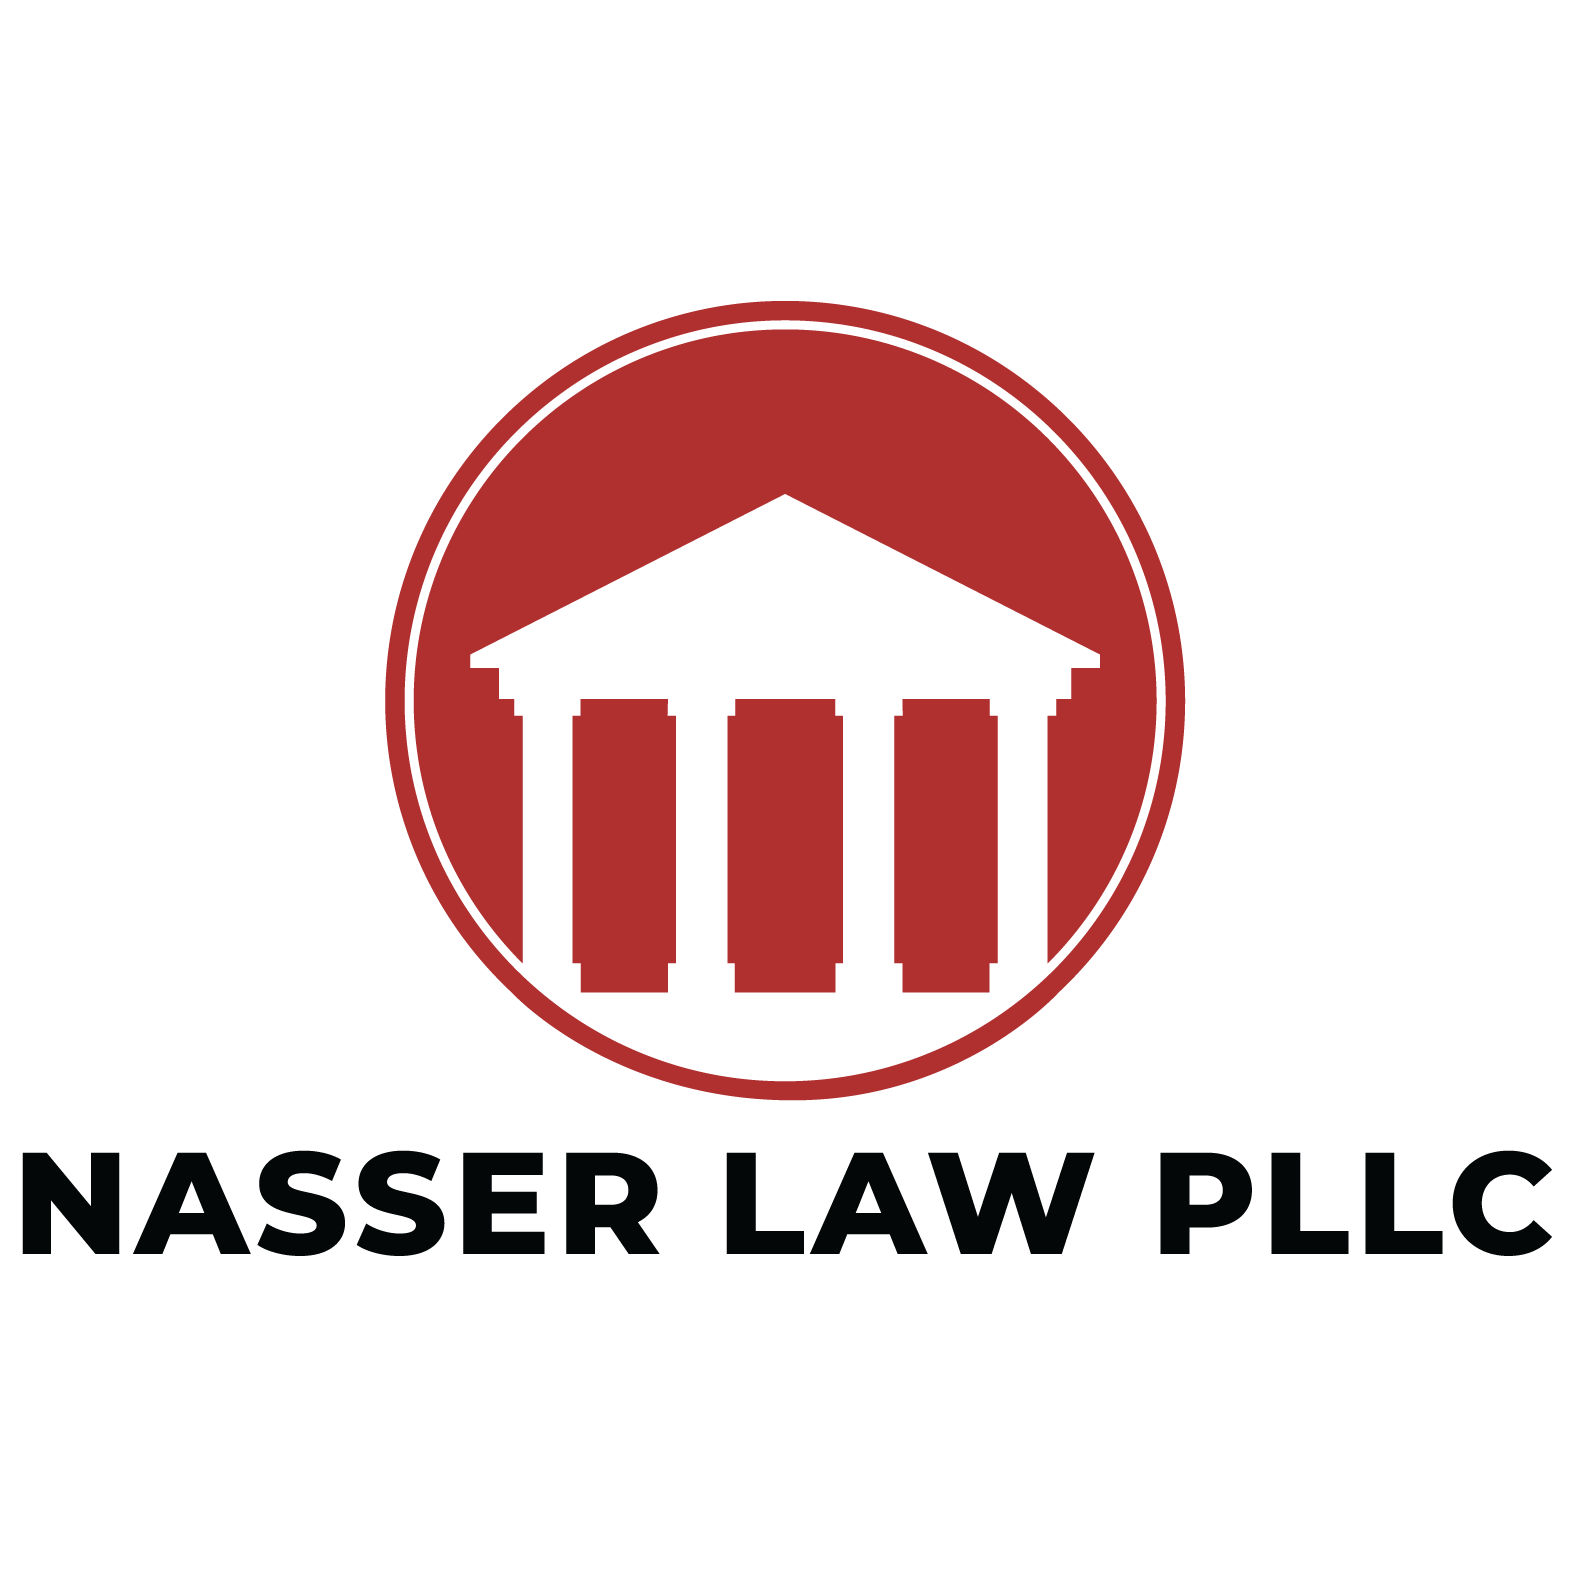 Nasser Law PLLC Provides Estate Planning and Small Business Counseling in NYC